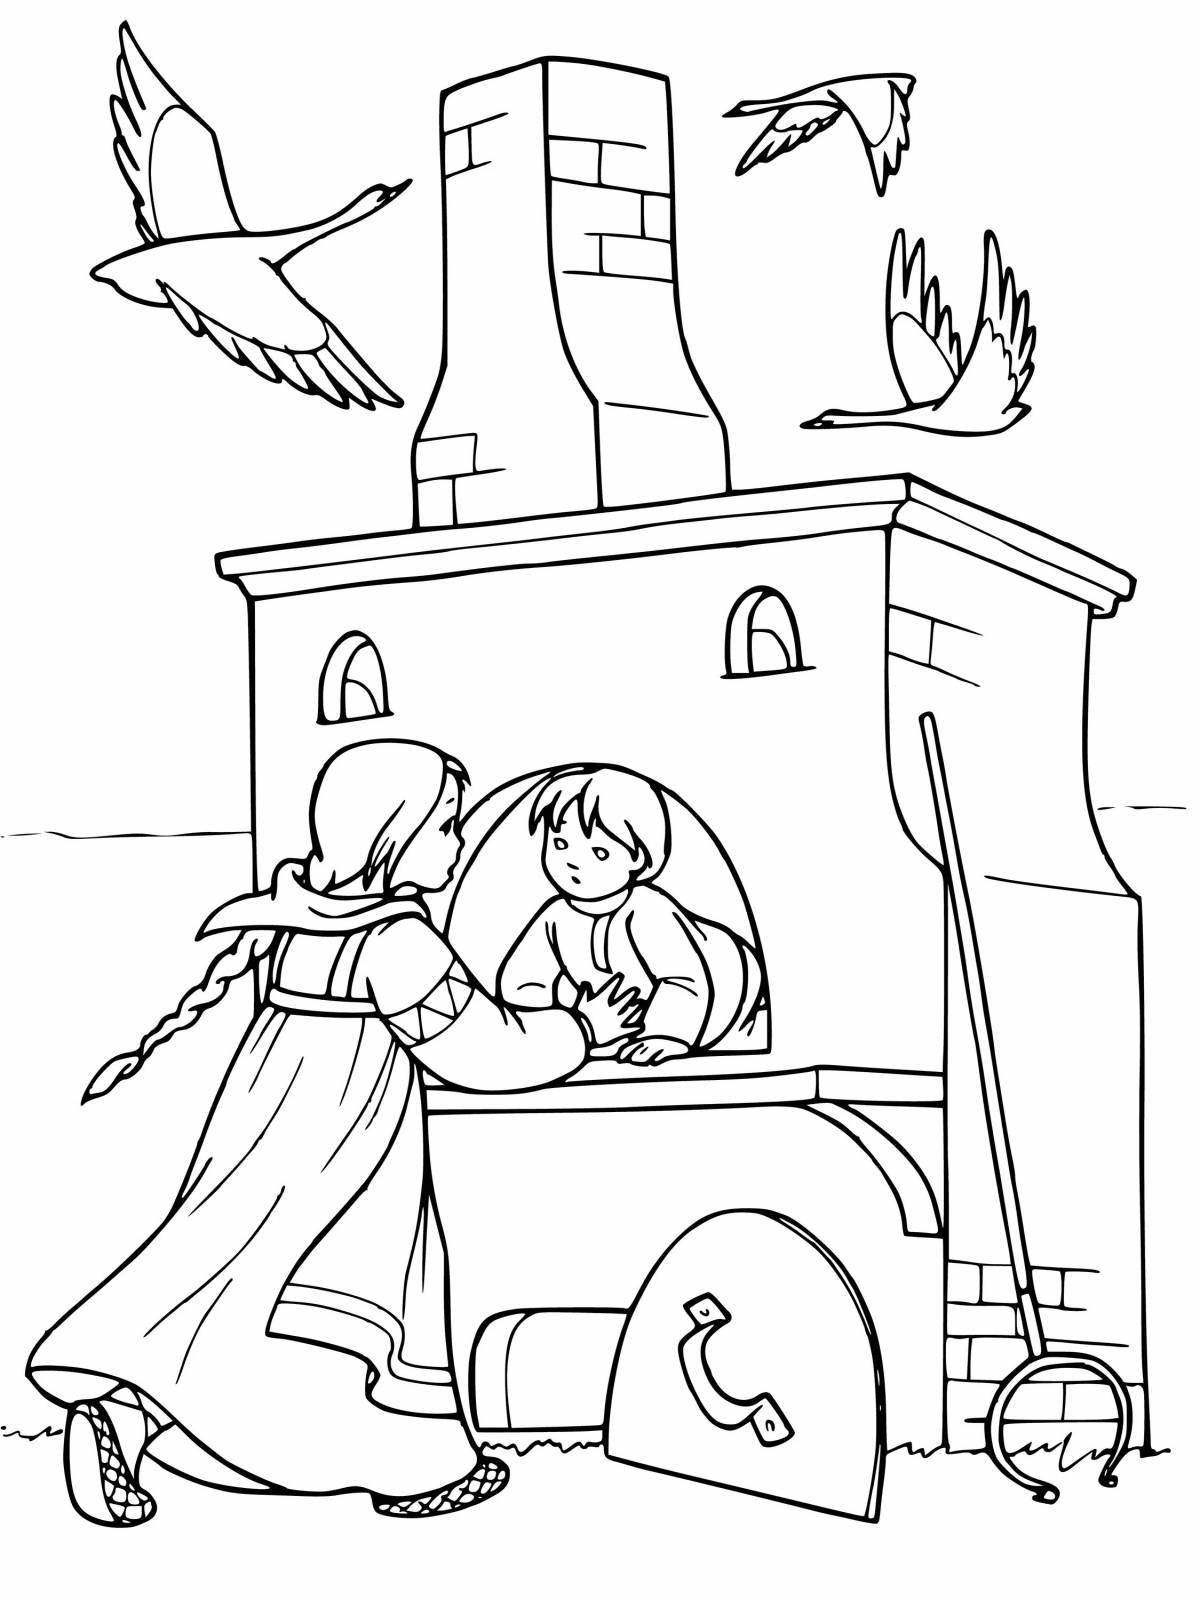 Radiant Russian oven coloring pages for kids